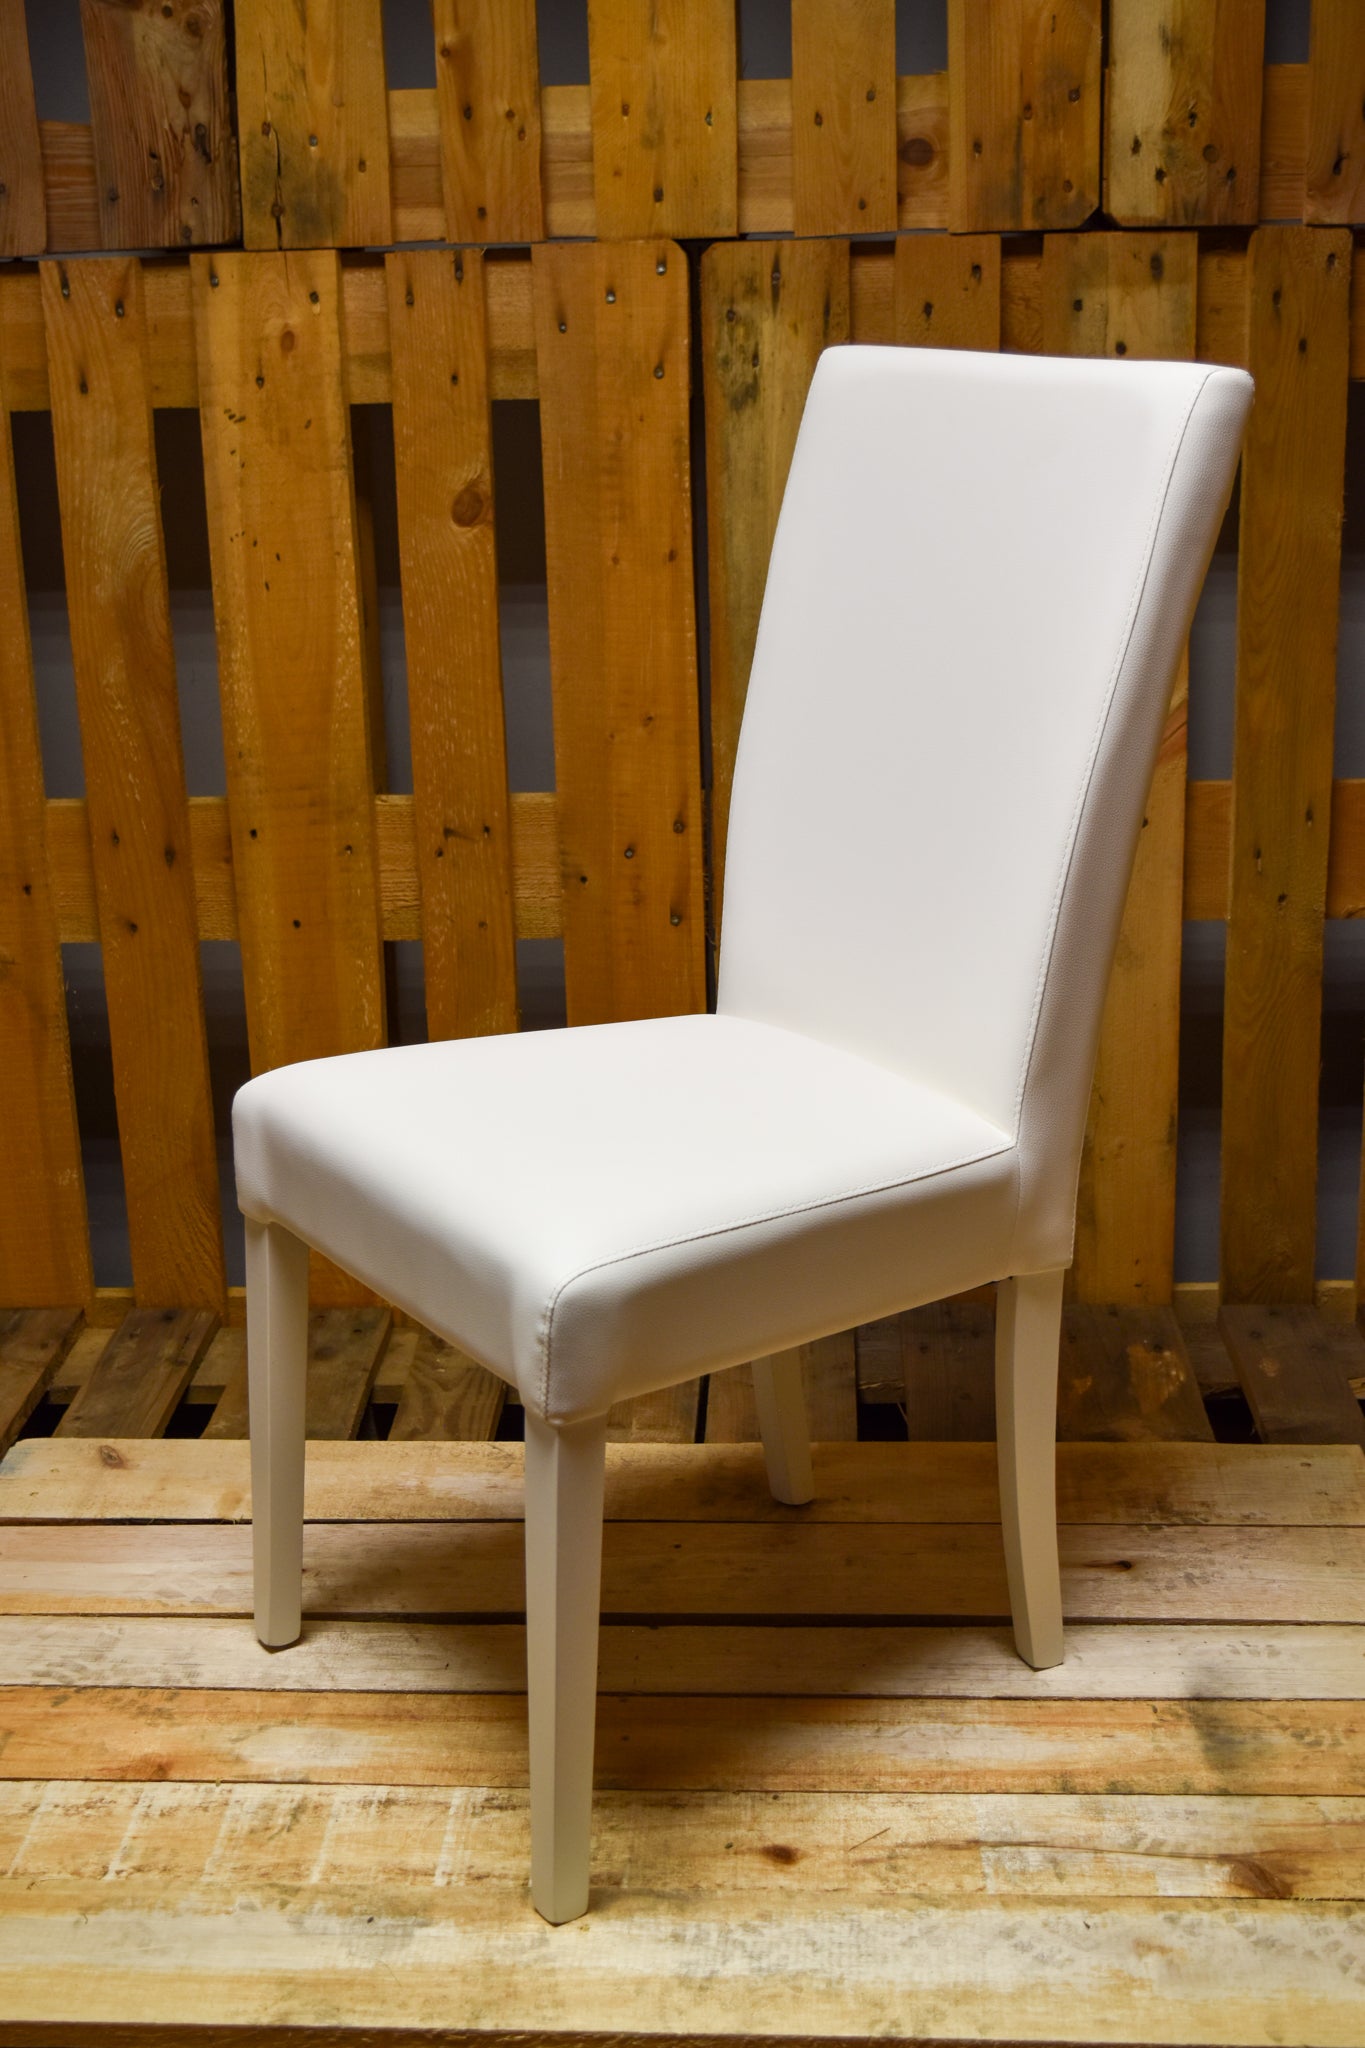 Stock model 46 white padded chairs